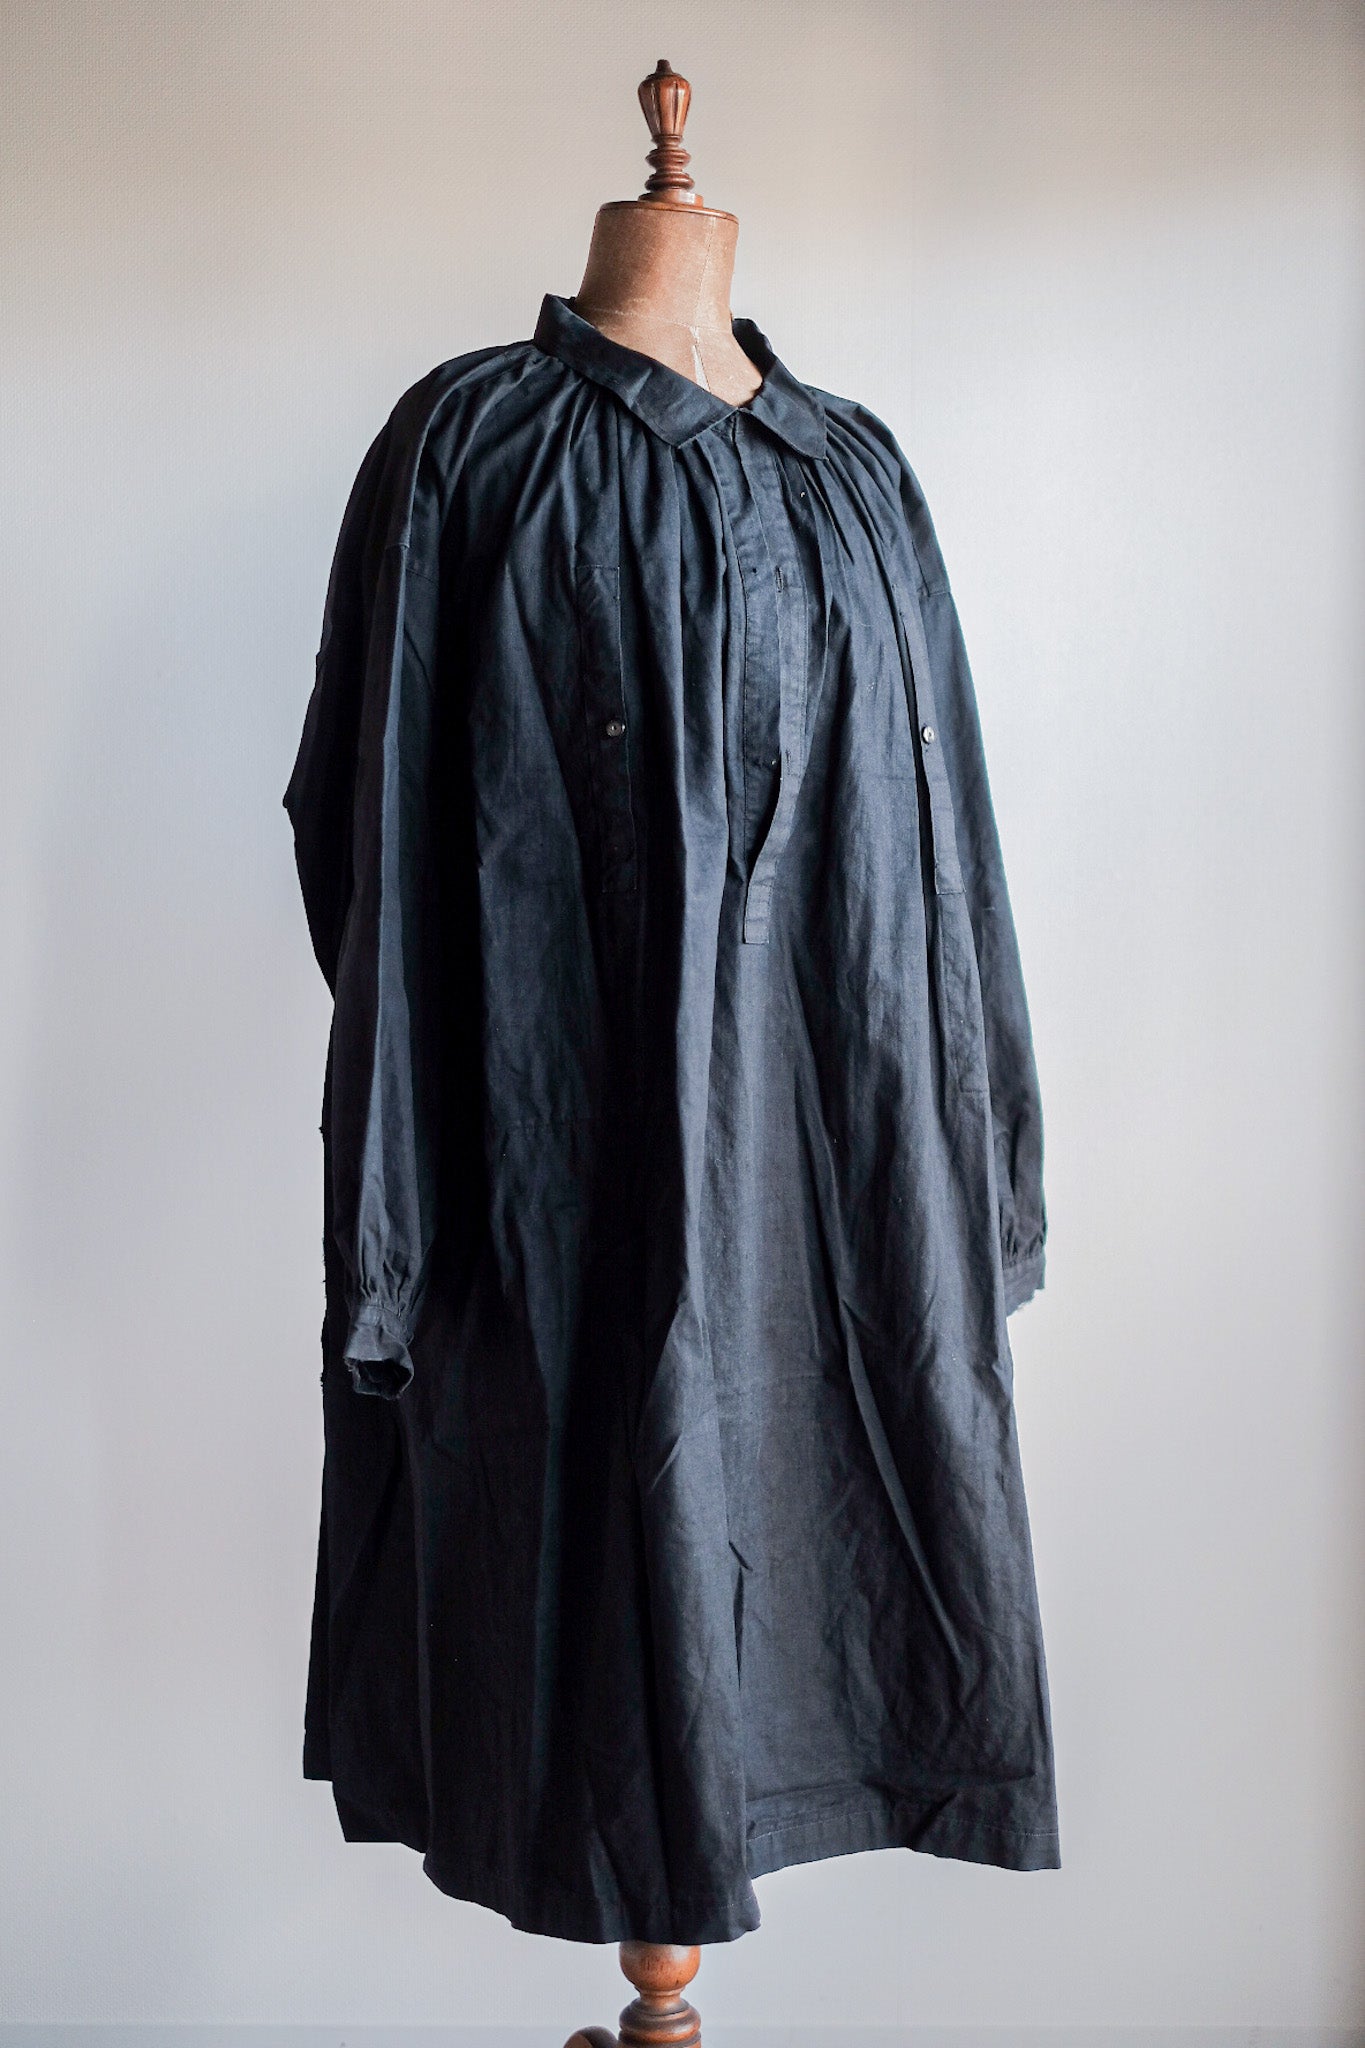 【Early 20th C】French Antique Black Linen Smock "Biaude"